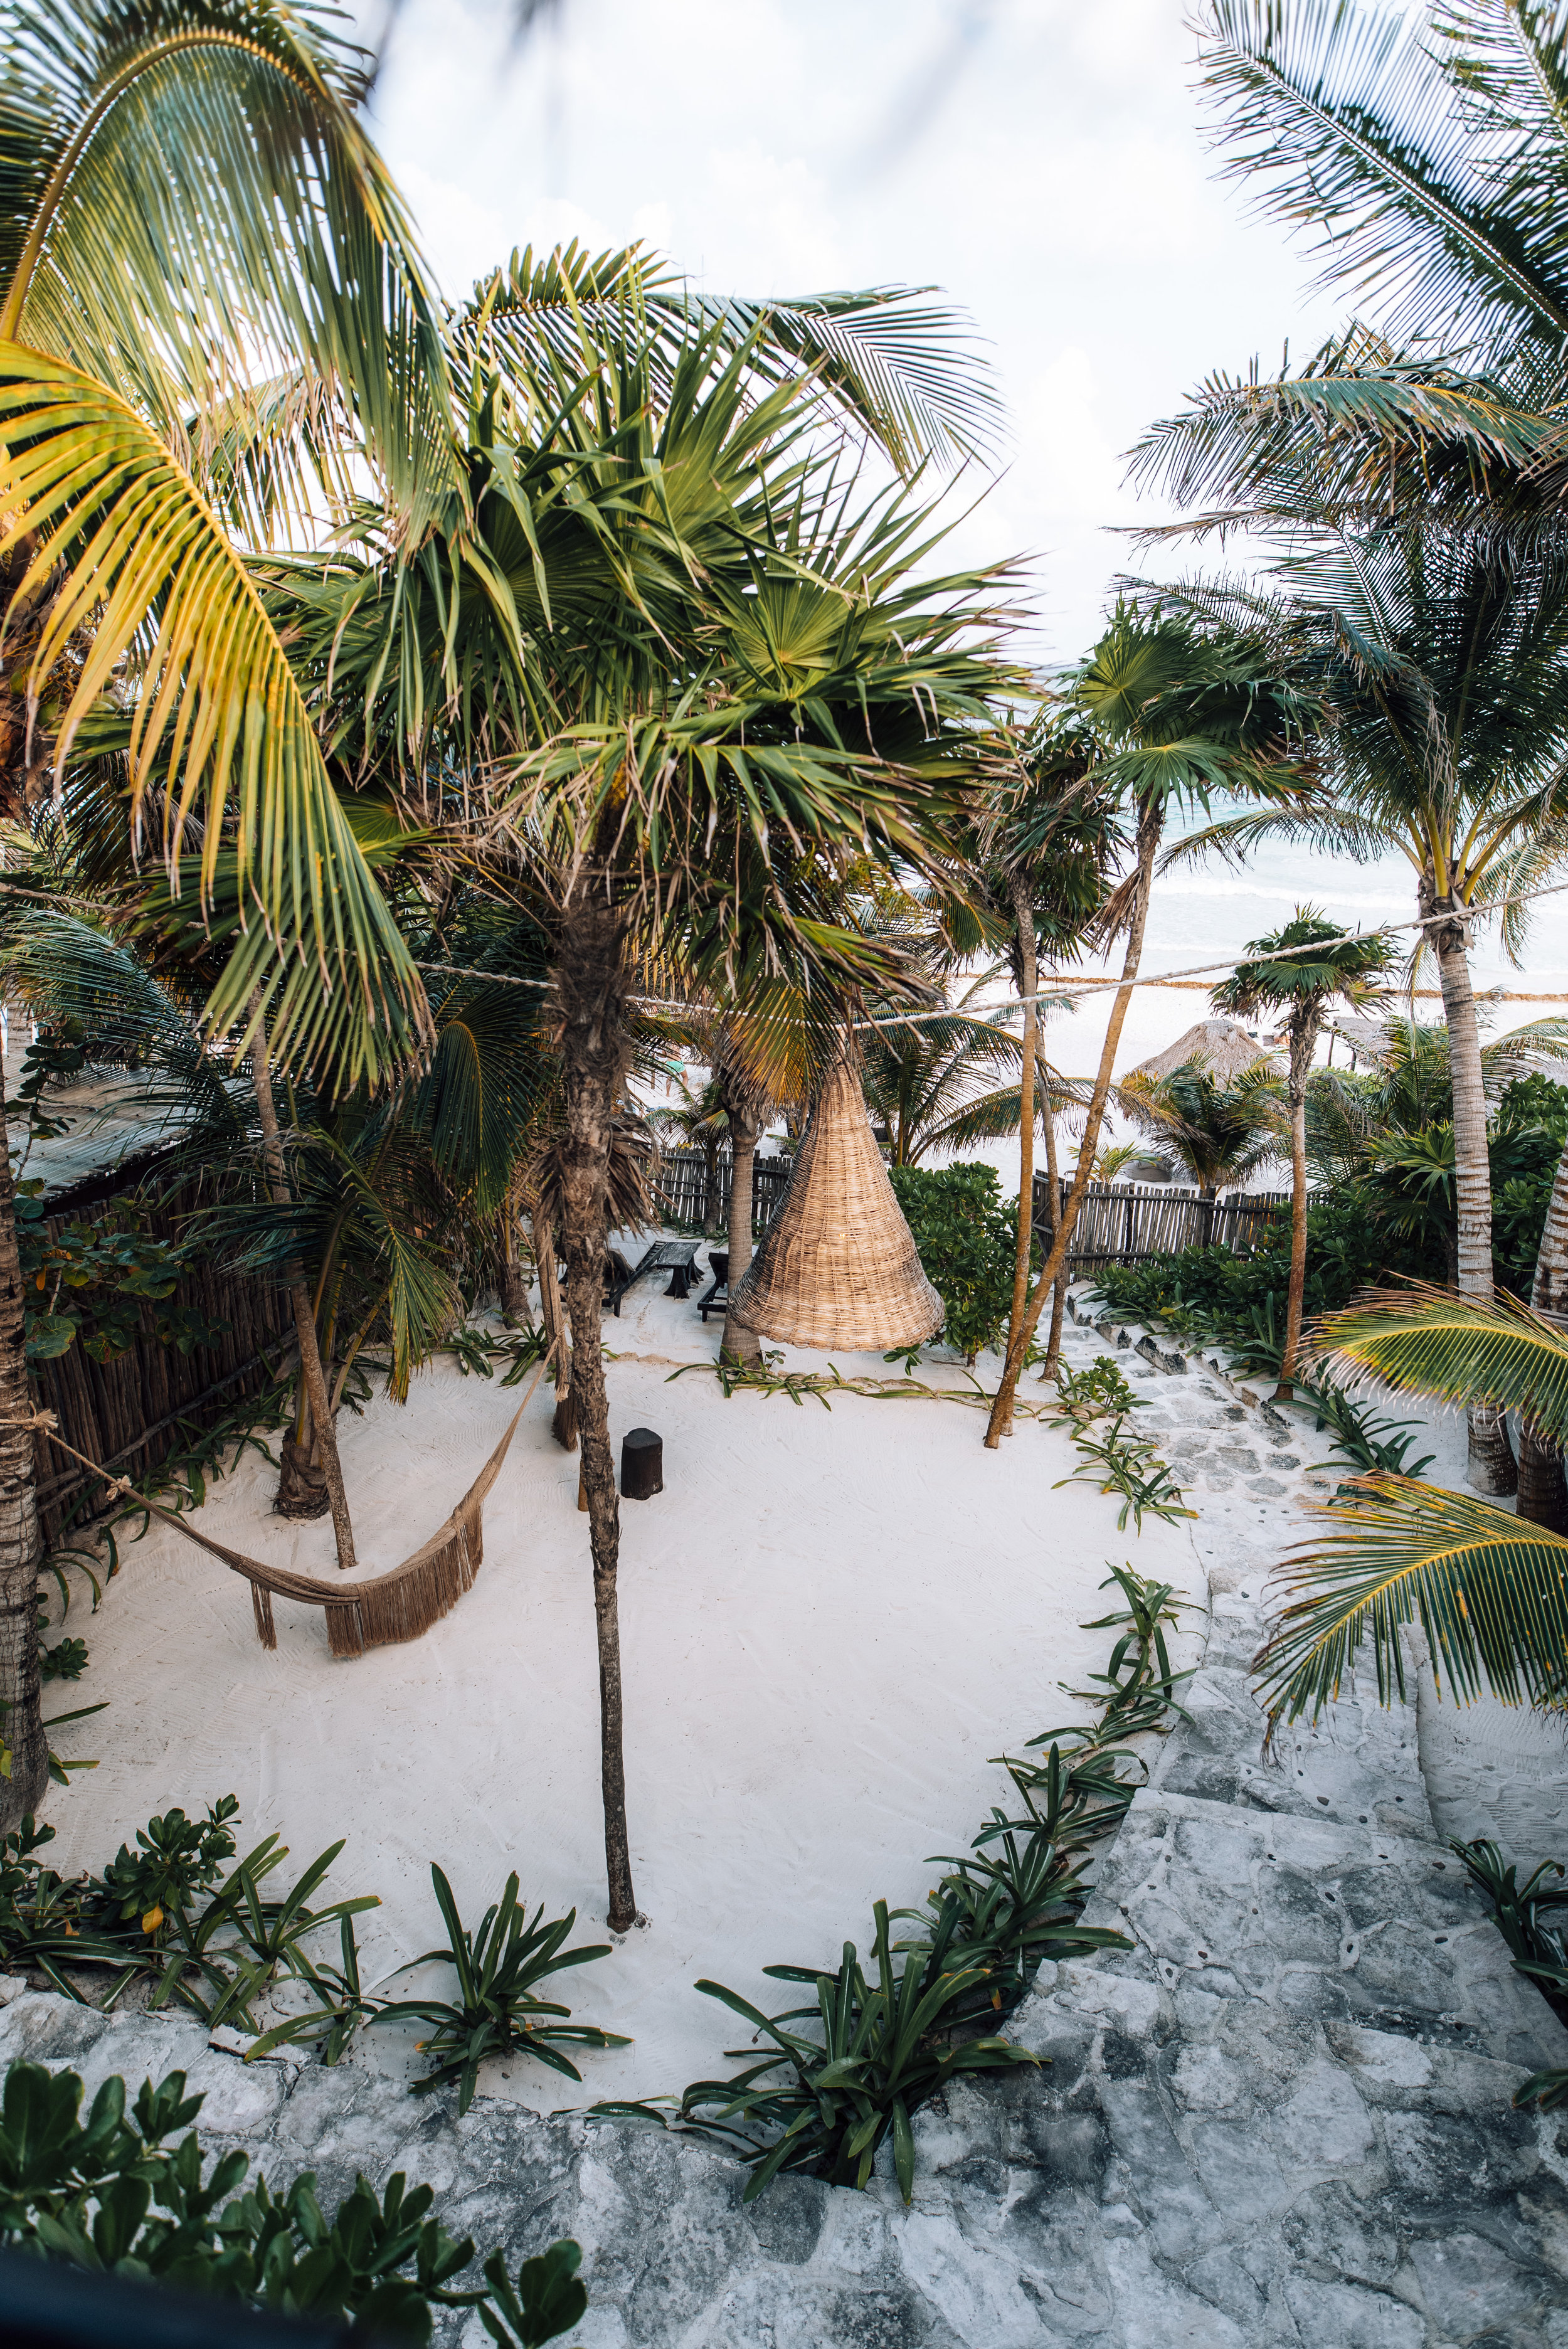  Nest Tulum. Find the best hotels in Tulum for a girls weekend getaway in Tulum. These are the most Instagrammable hotels in Tulum perfect for a girls trip to Tulum. #tulummexico #tulumhotels | Tulum hotels design | Tulum hotels luxury | best hotels 